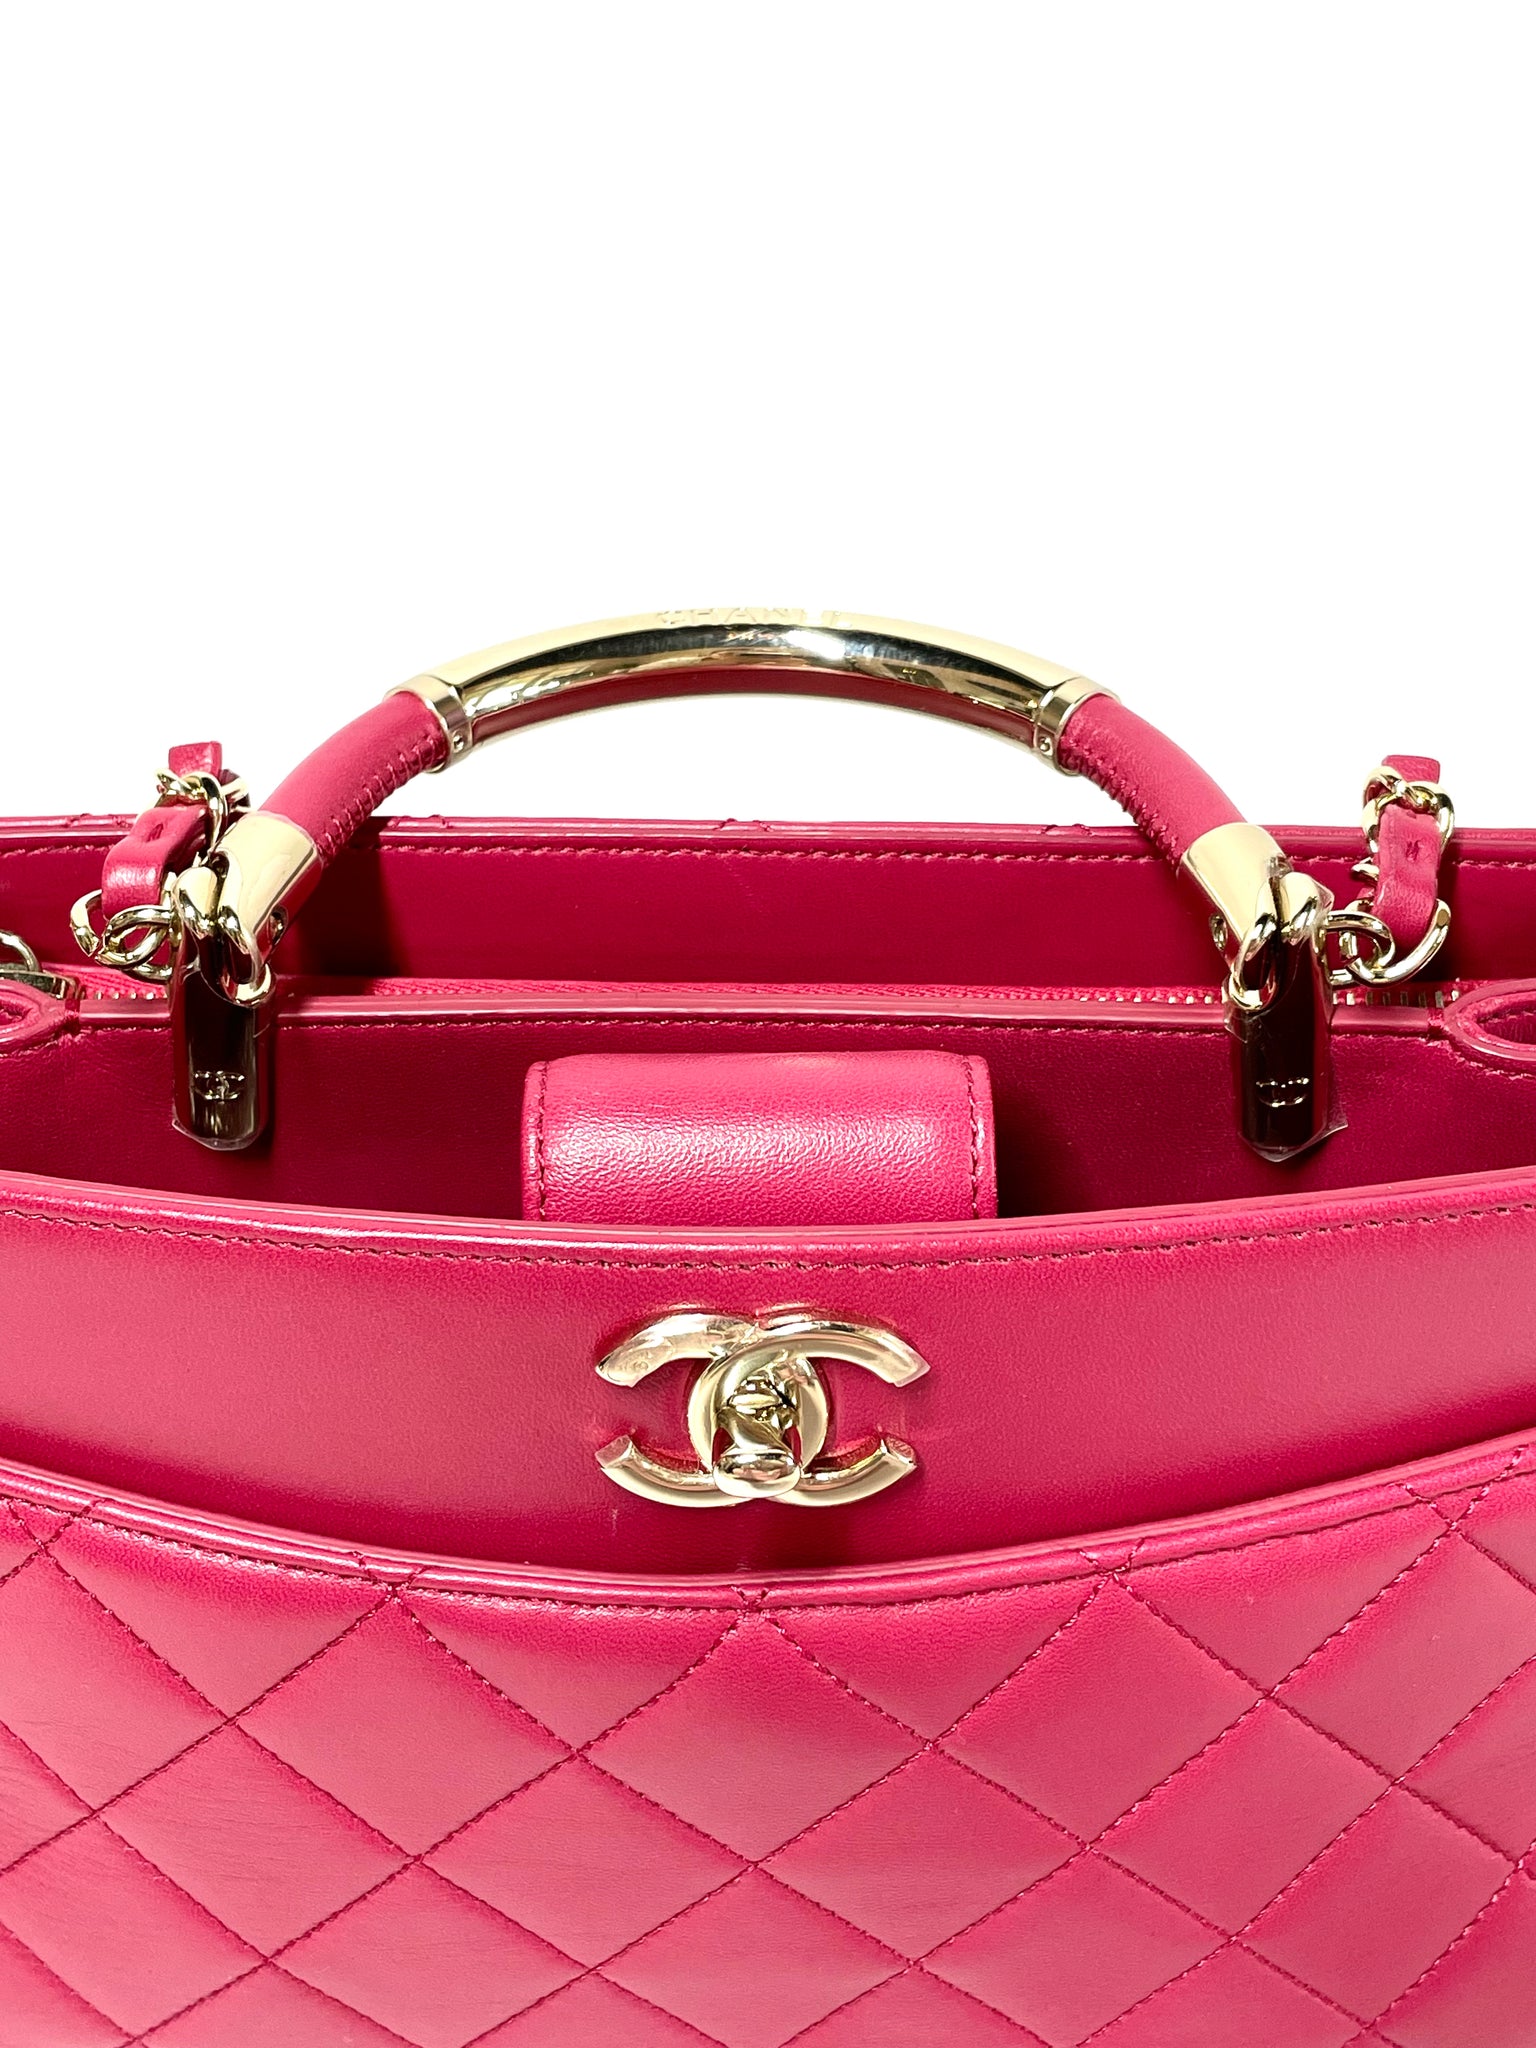 Pre Loved Chanel Carry Chic Tote Bag in Raspberry Pink available at UniKoncept in Waterloo